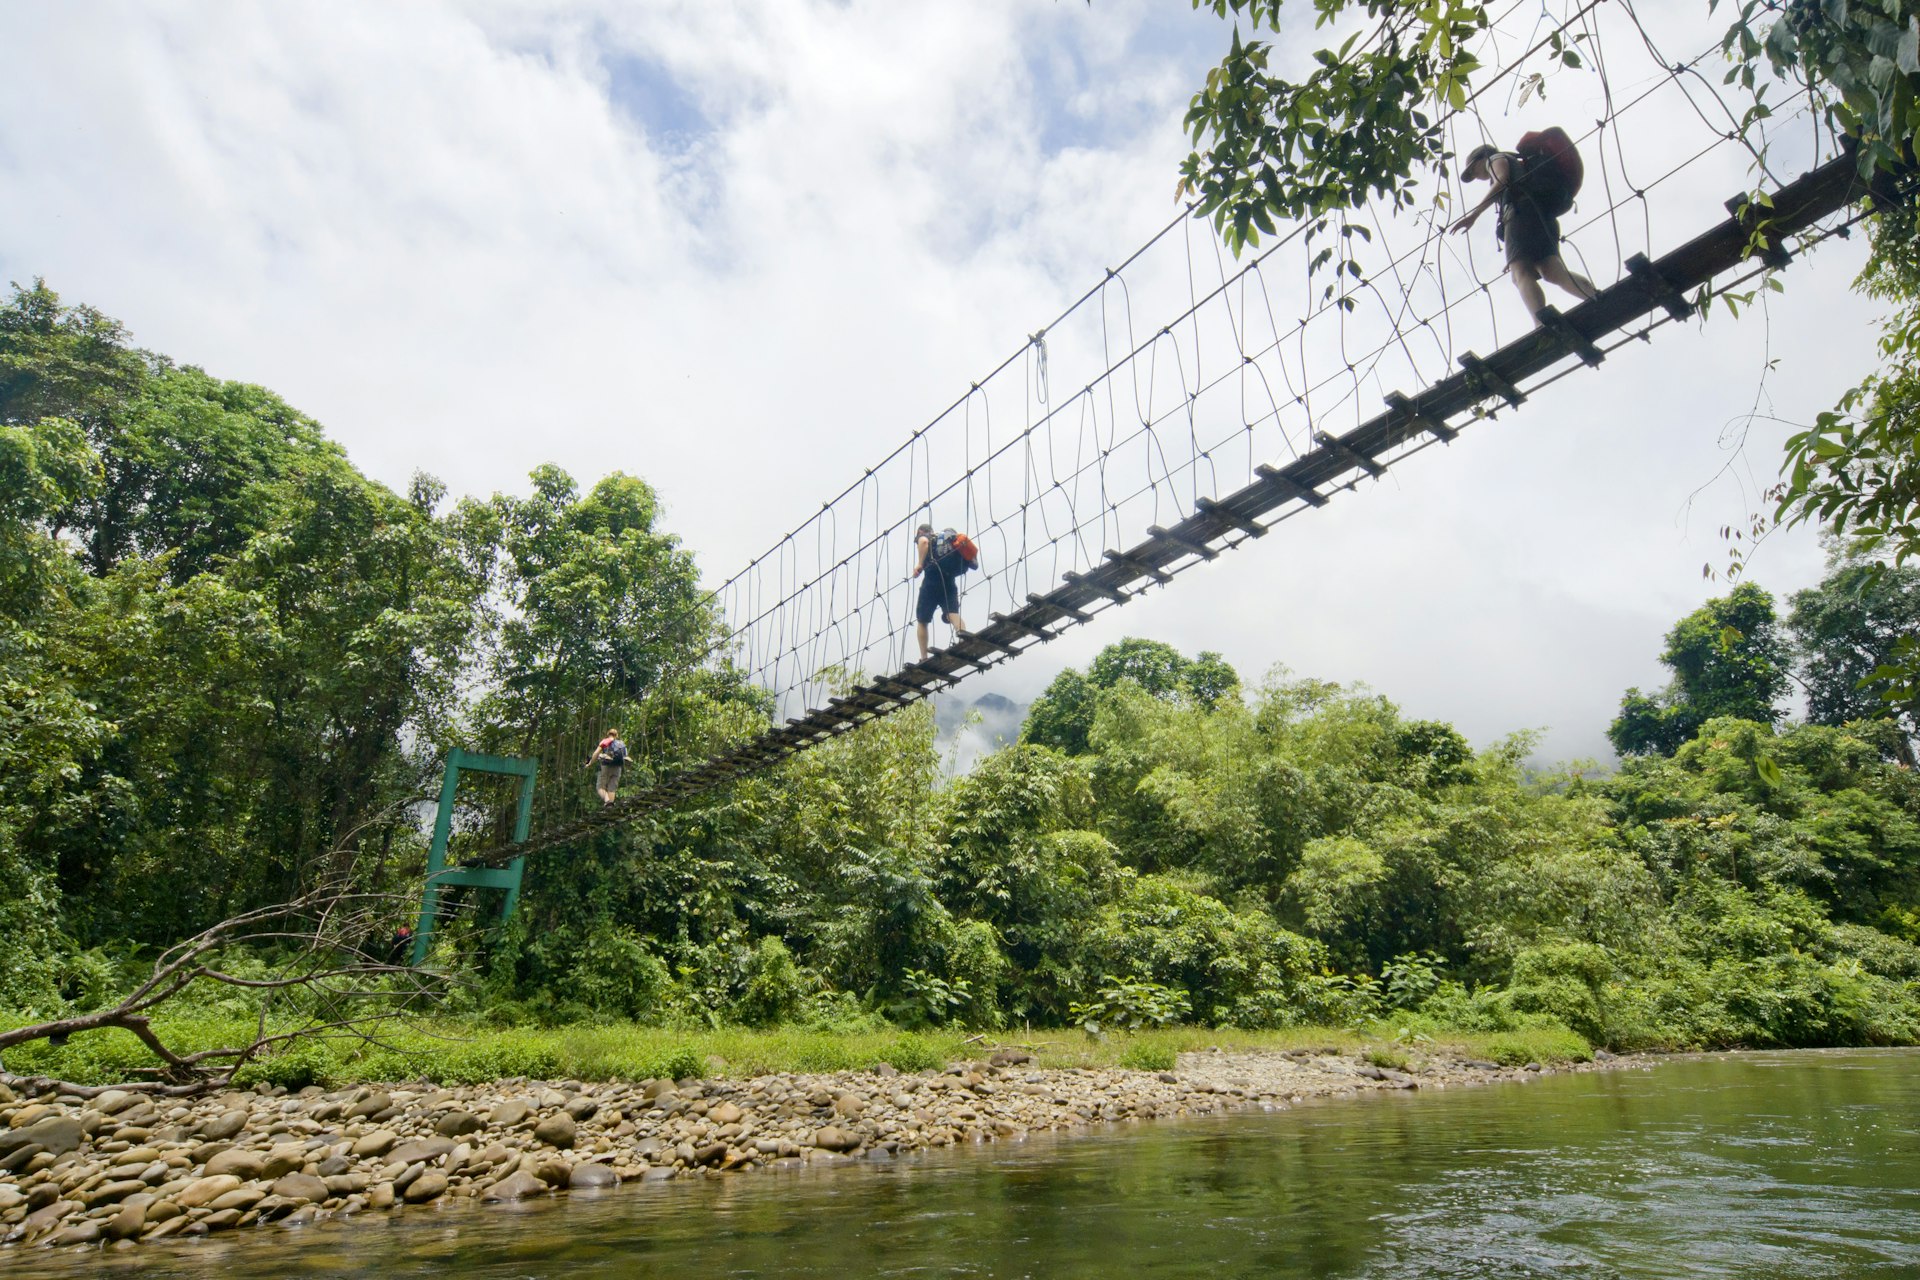 Two tourists with backpacks crossing a suspension bridge.